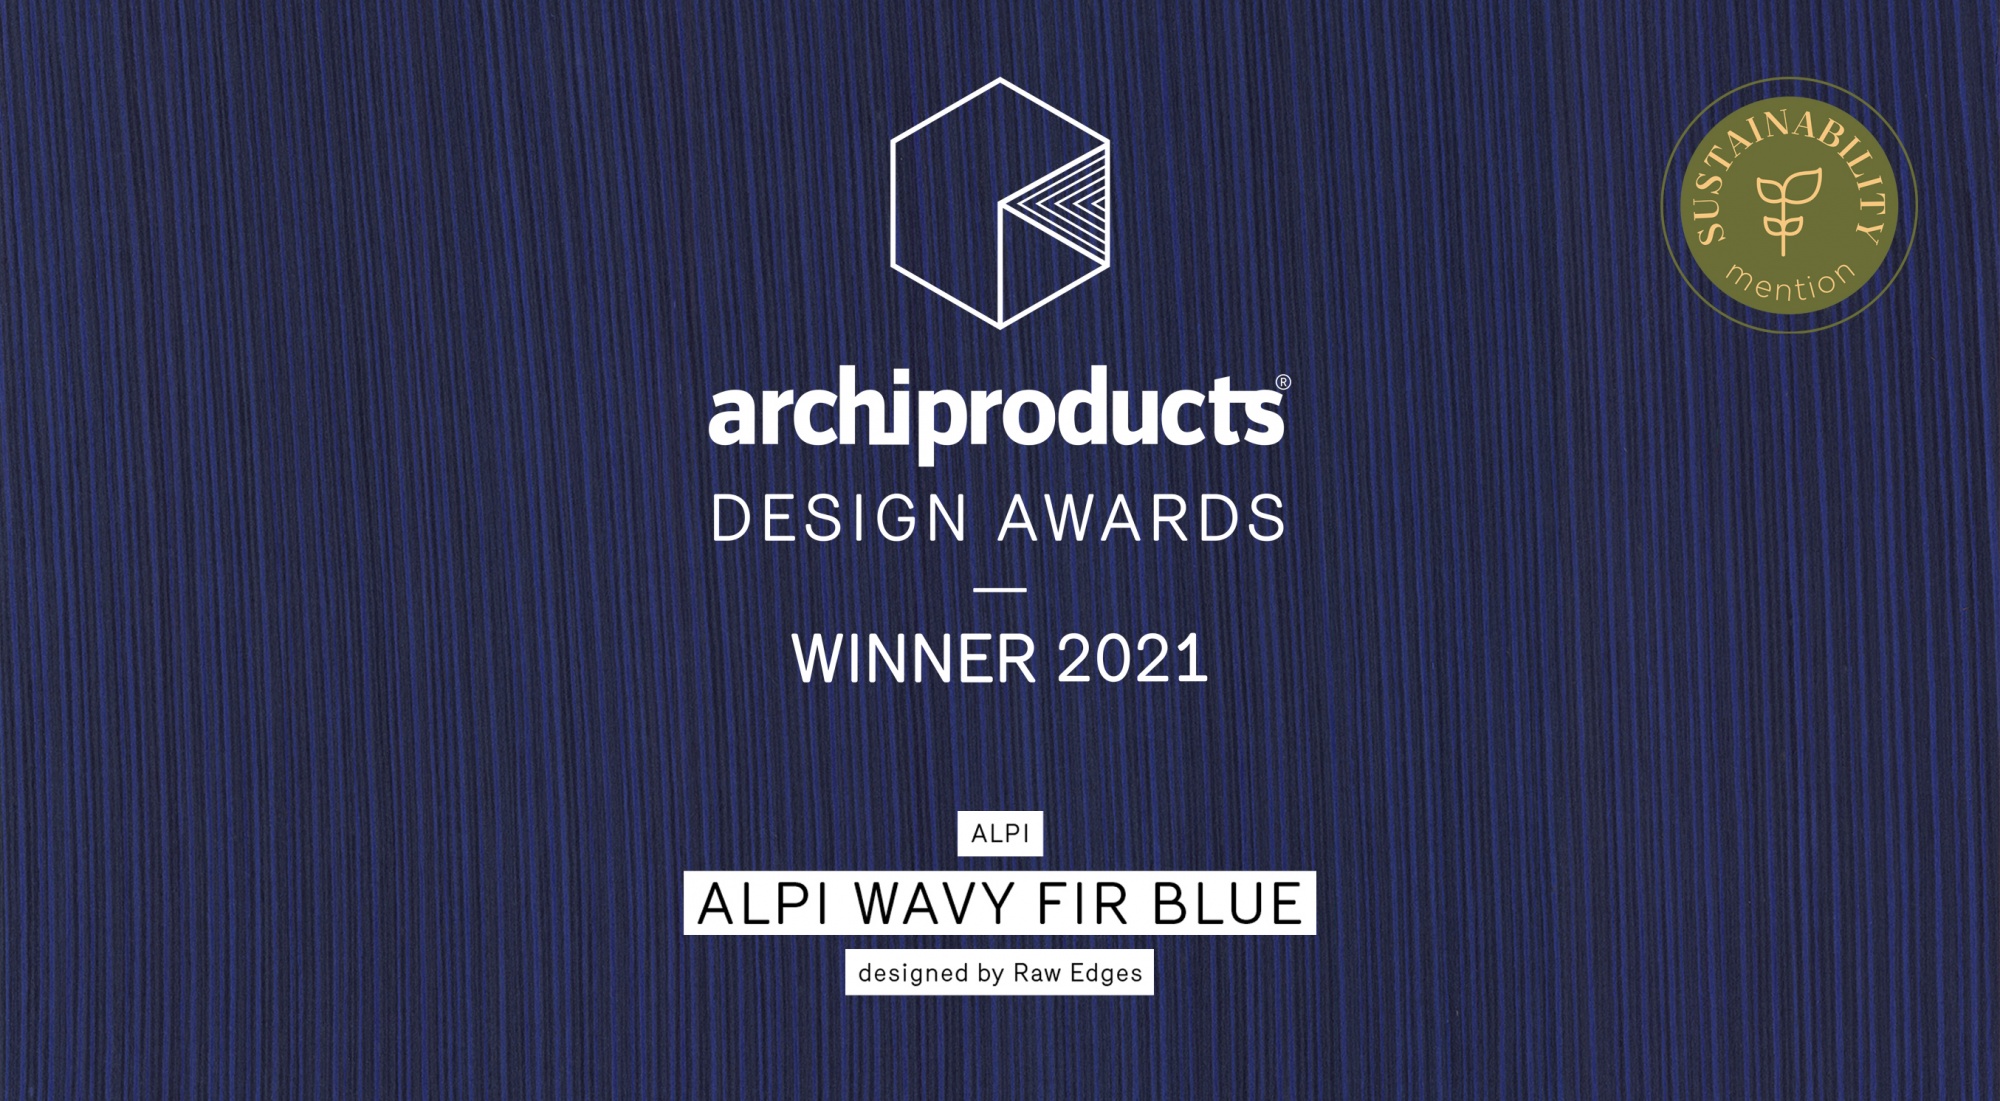 ALPI Wavy Fir by Raw Edges wins the Archiproducts Awards 2021